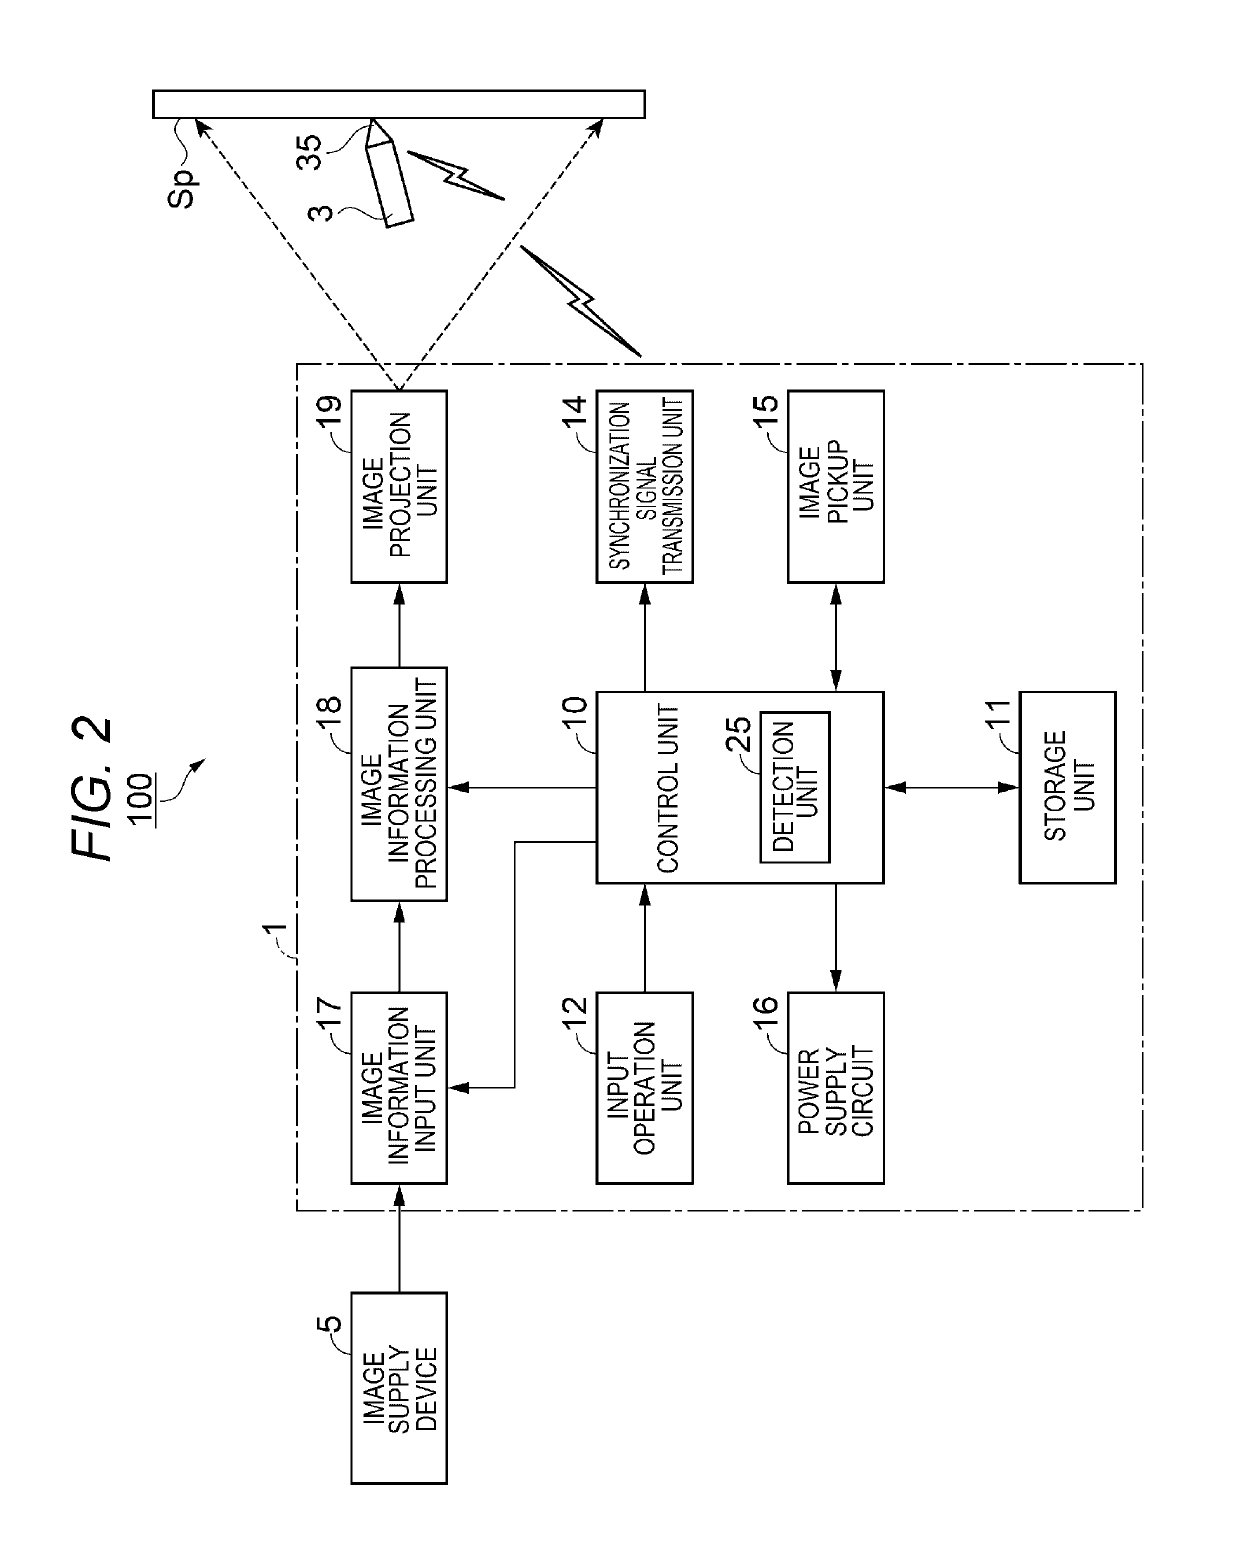 Pointing element, image projection system, and method for controlling pointing element